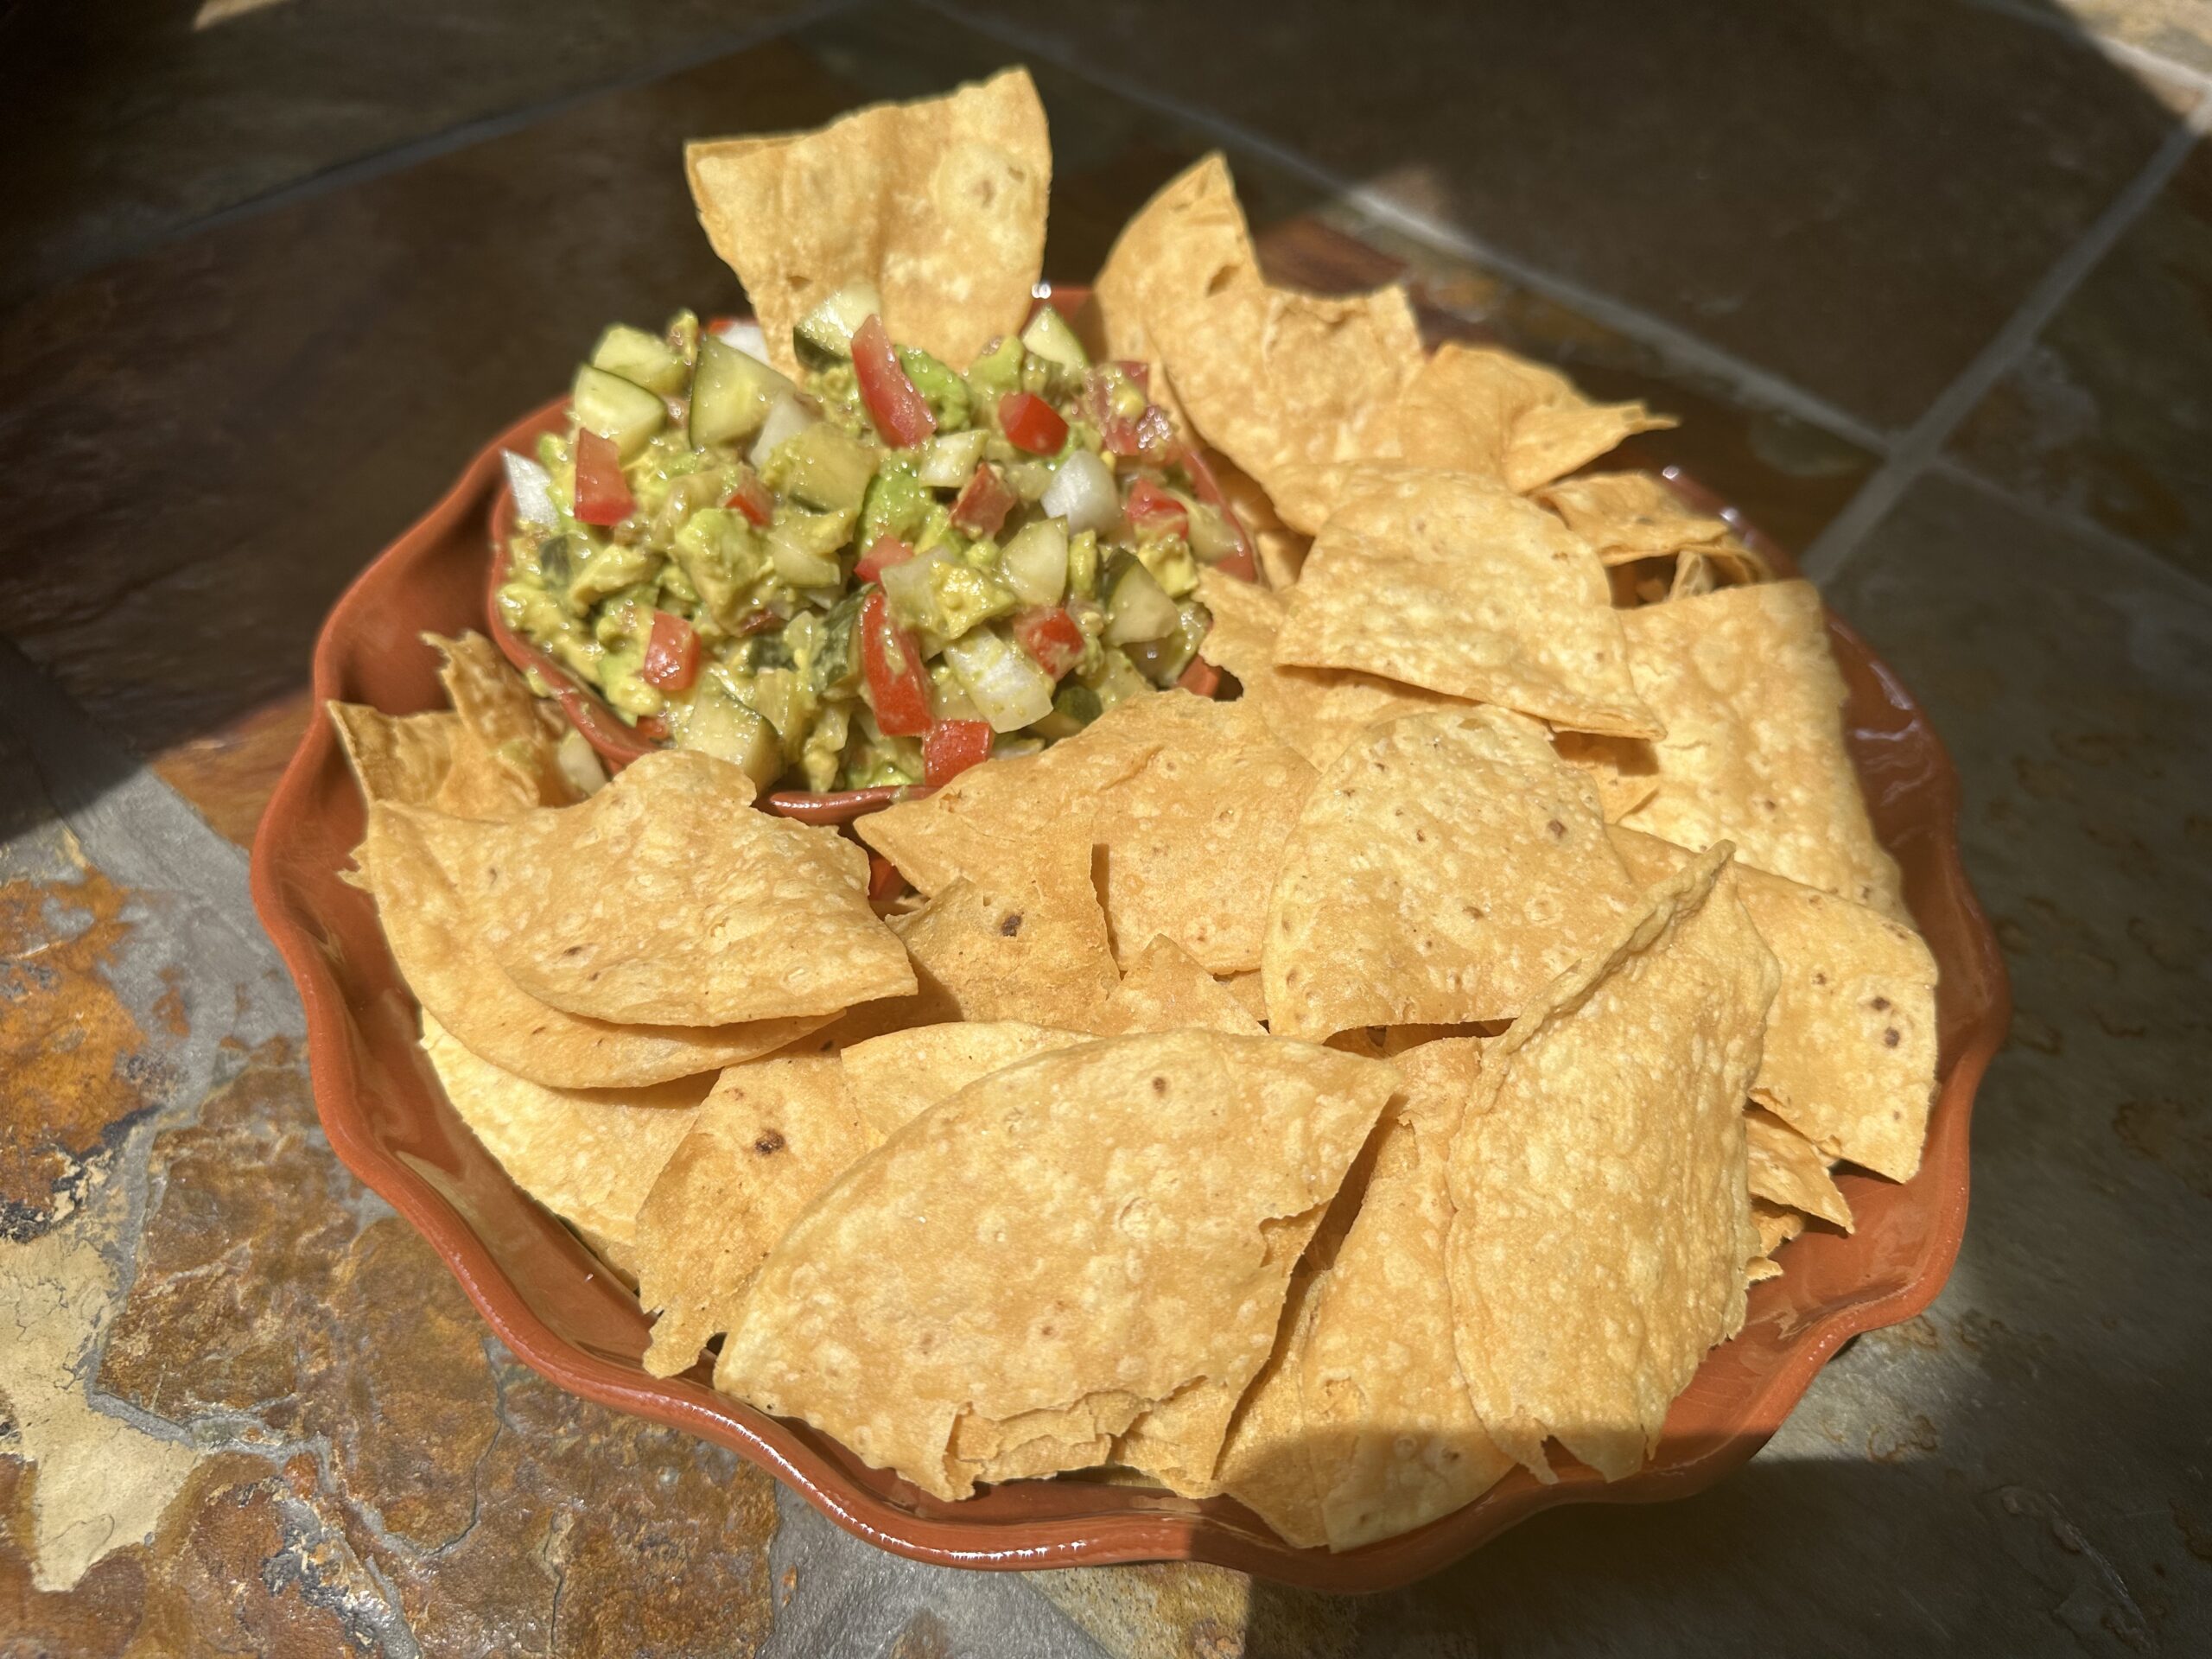 The Great Lakes Pickling Company's Bloody Guac-A-Mary Pickle Dip